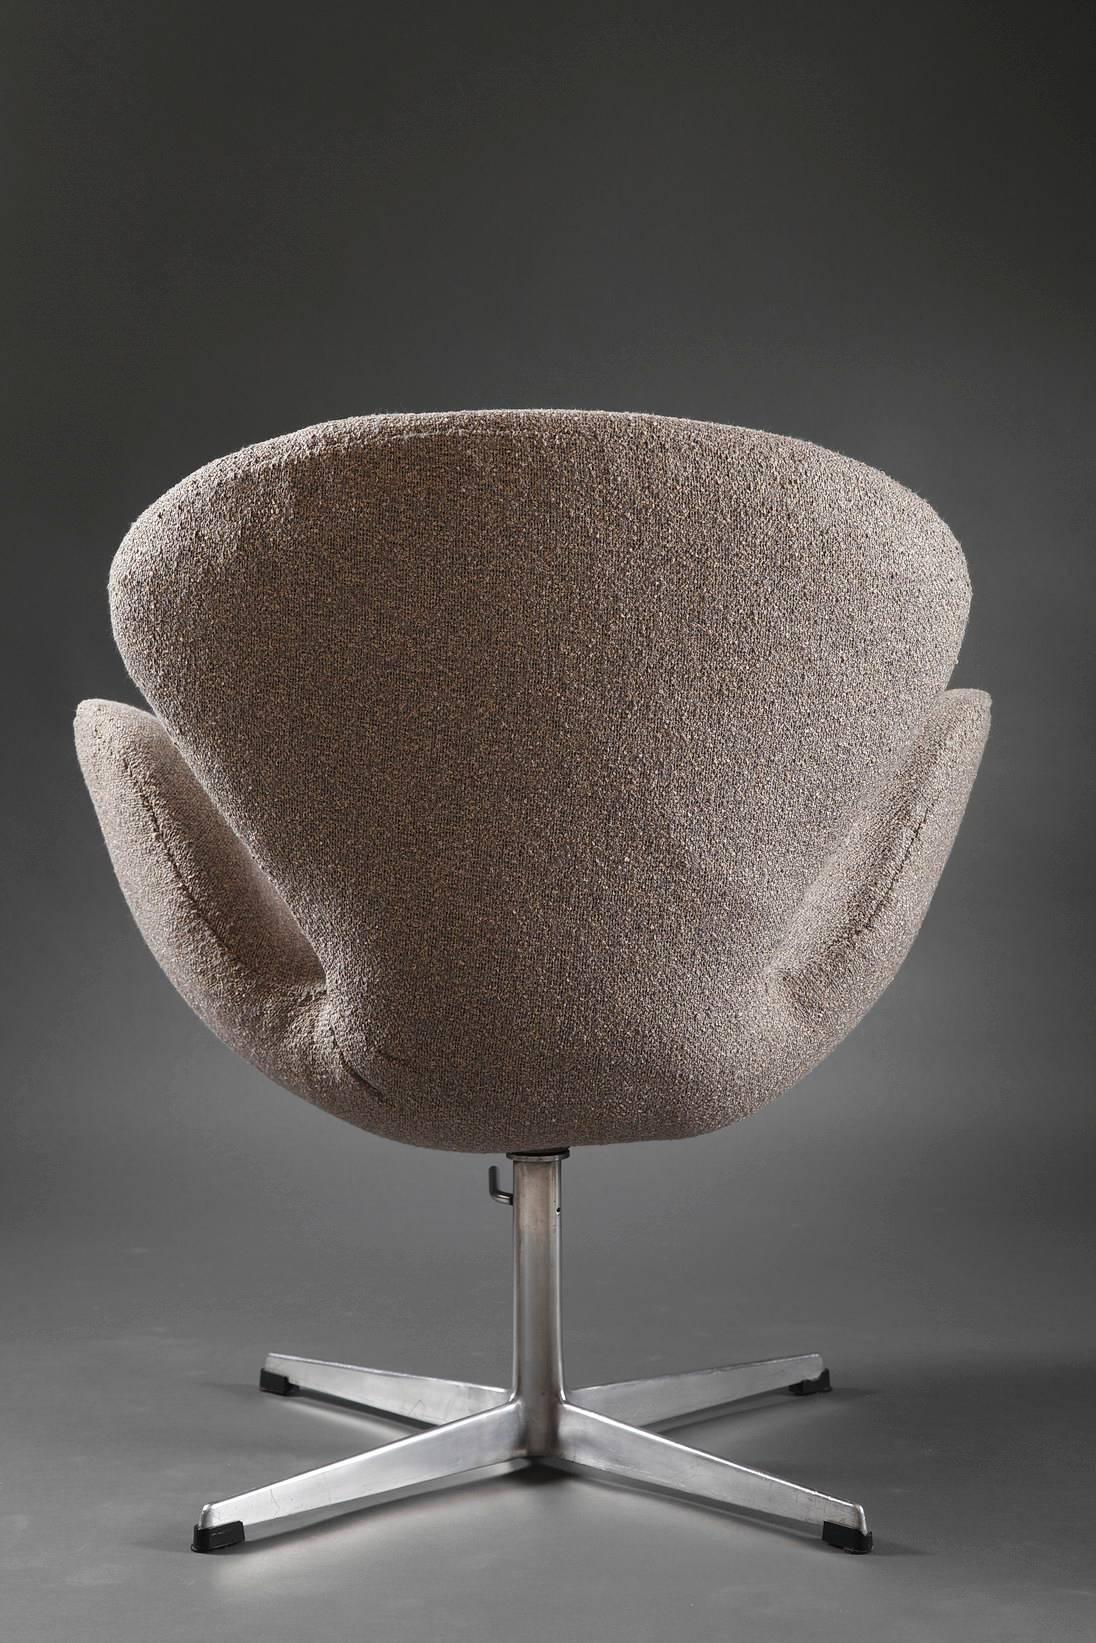 Mid-20th Century Swan Chair by Arne Jacobsen